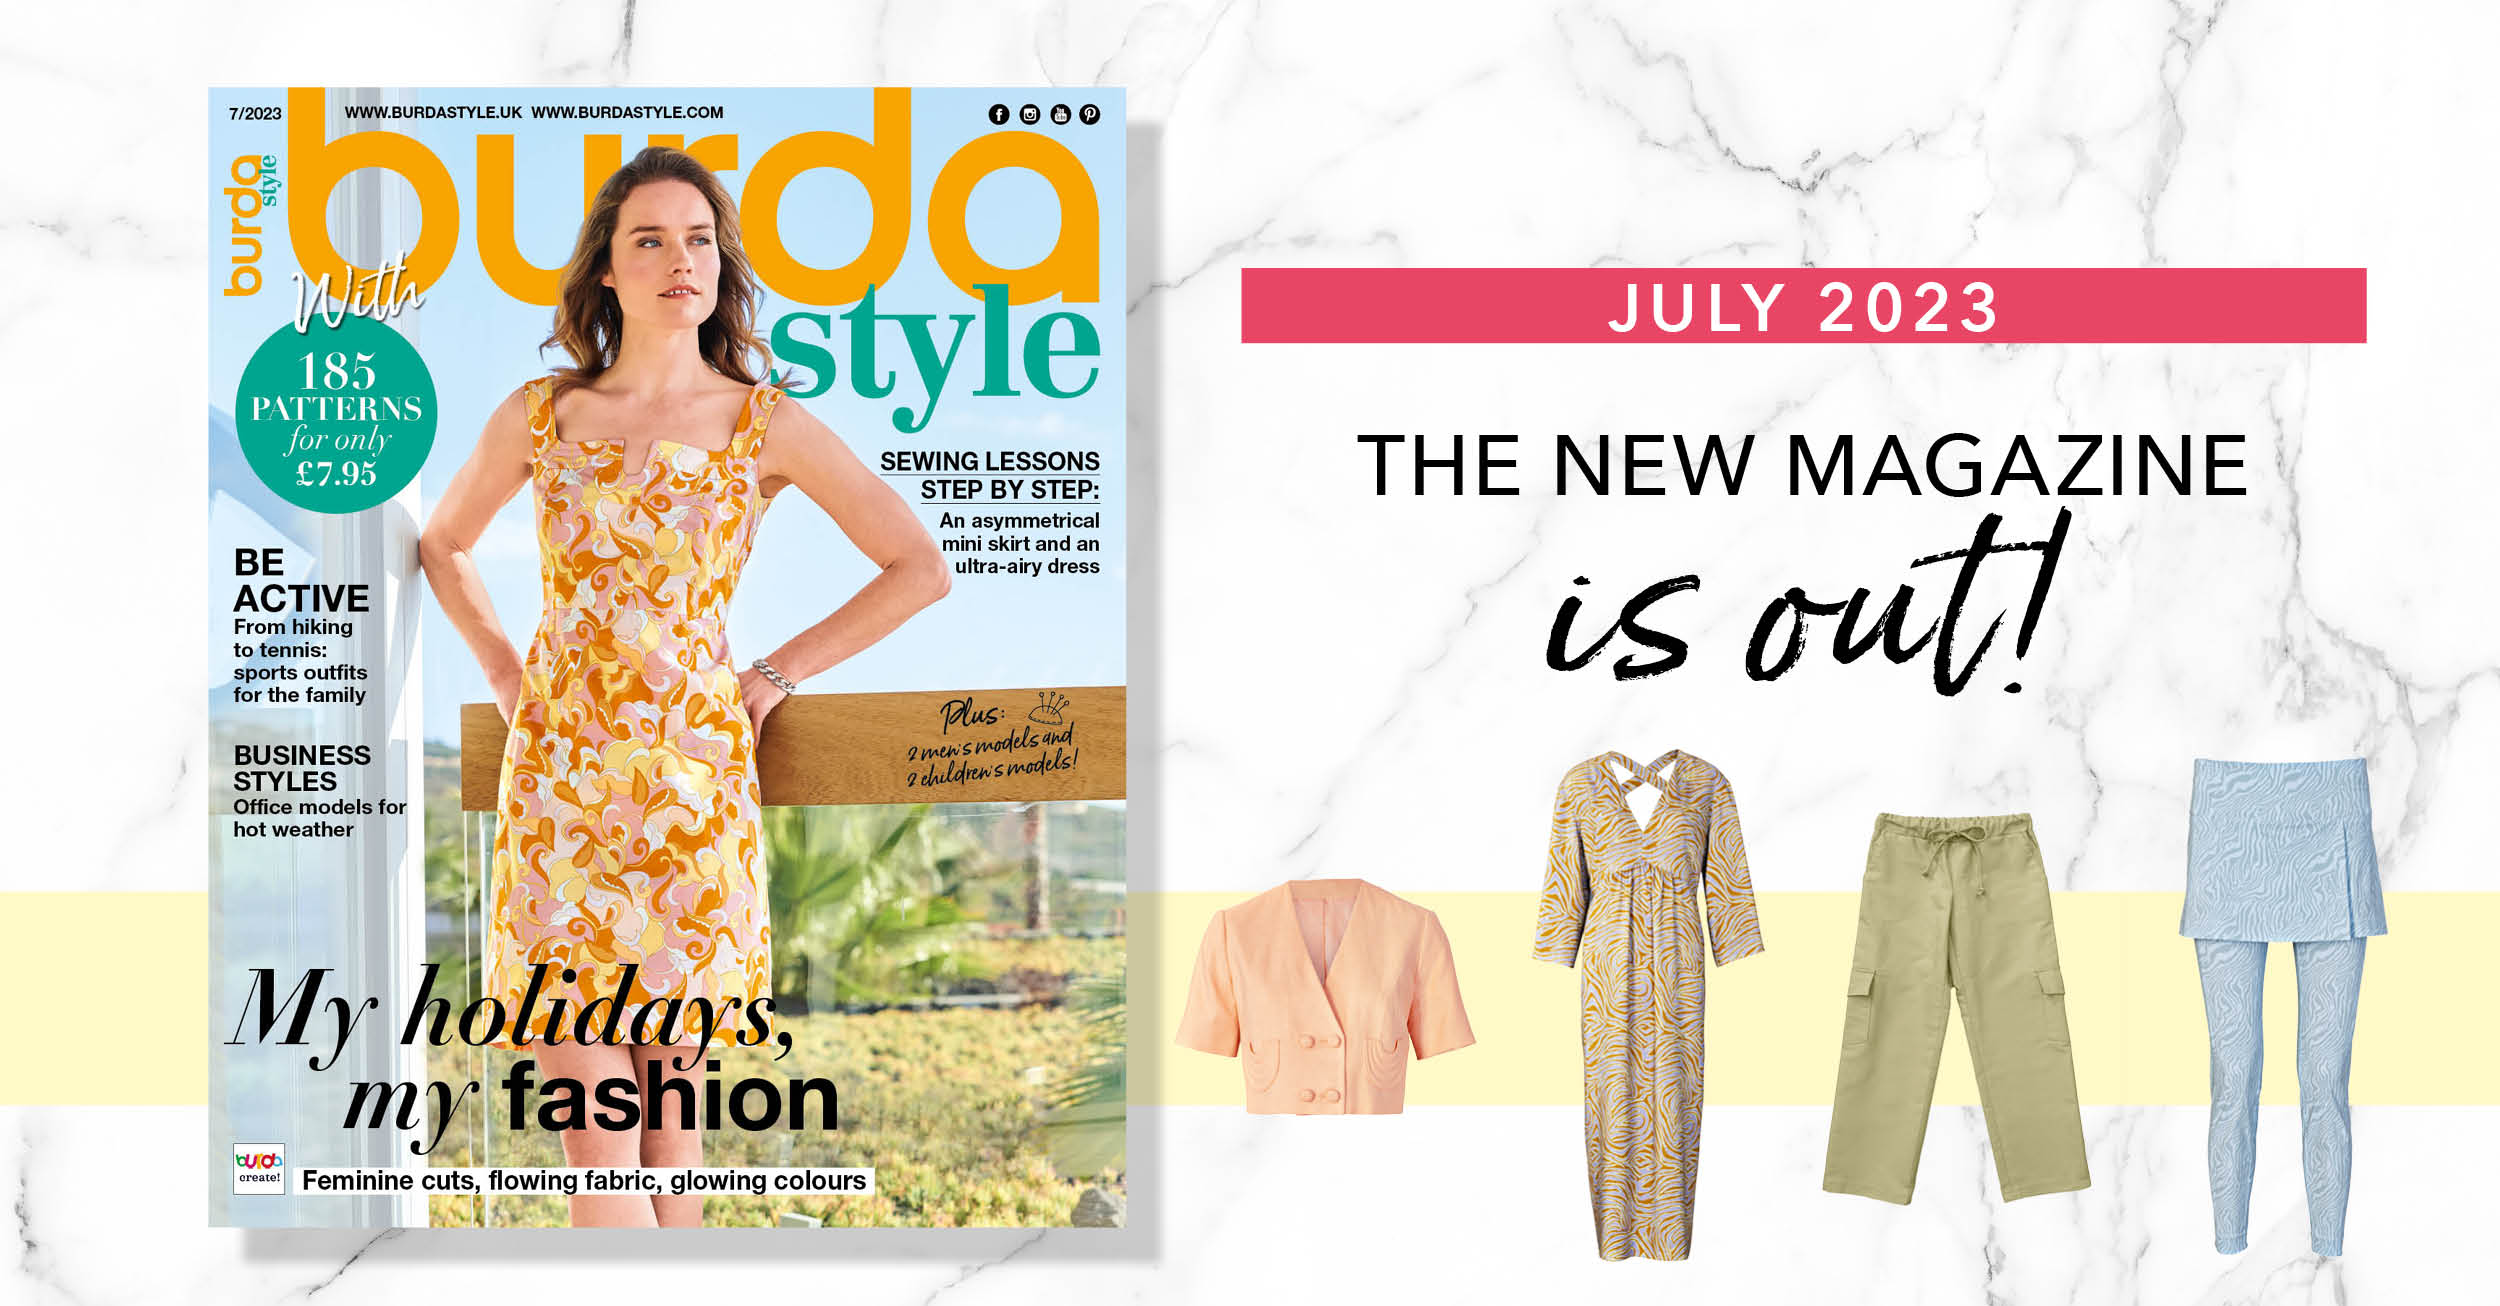 July 2023: The New Issue of Burda Style!